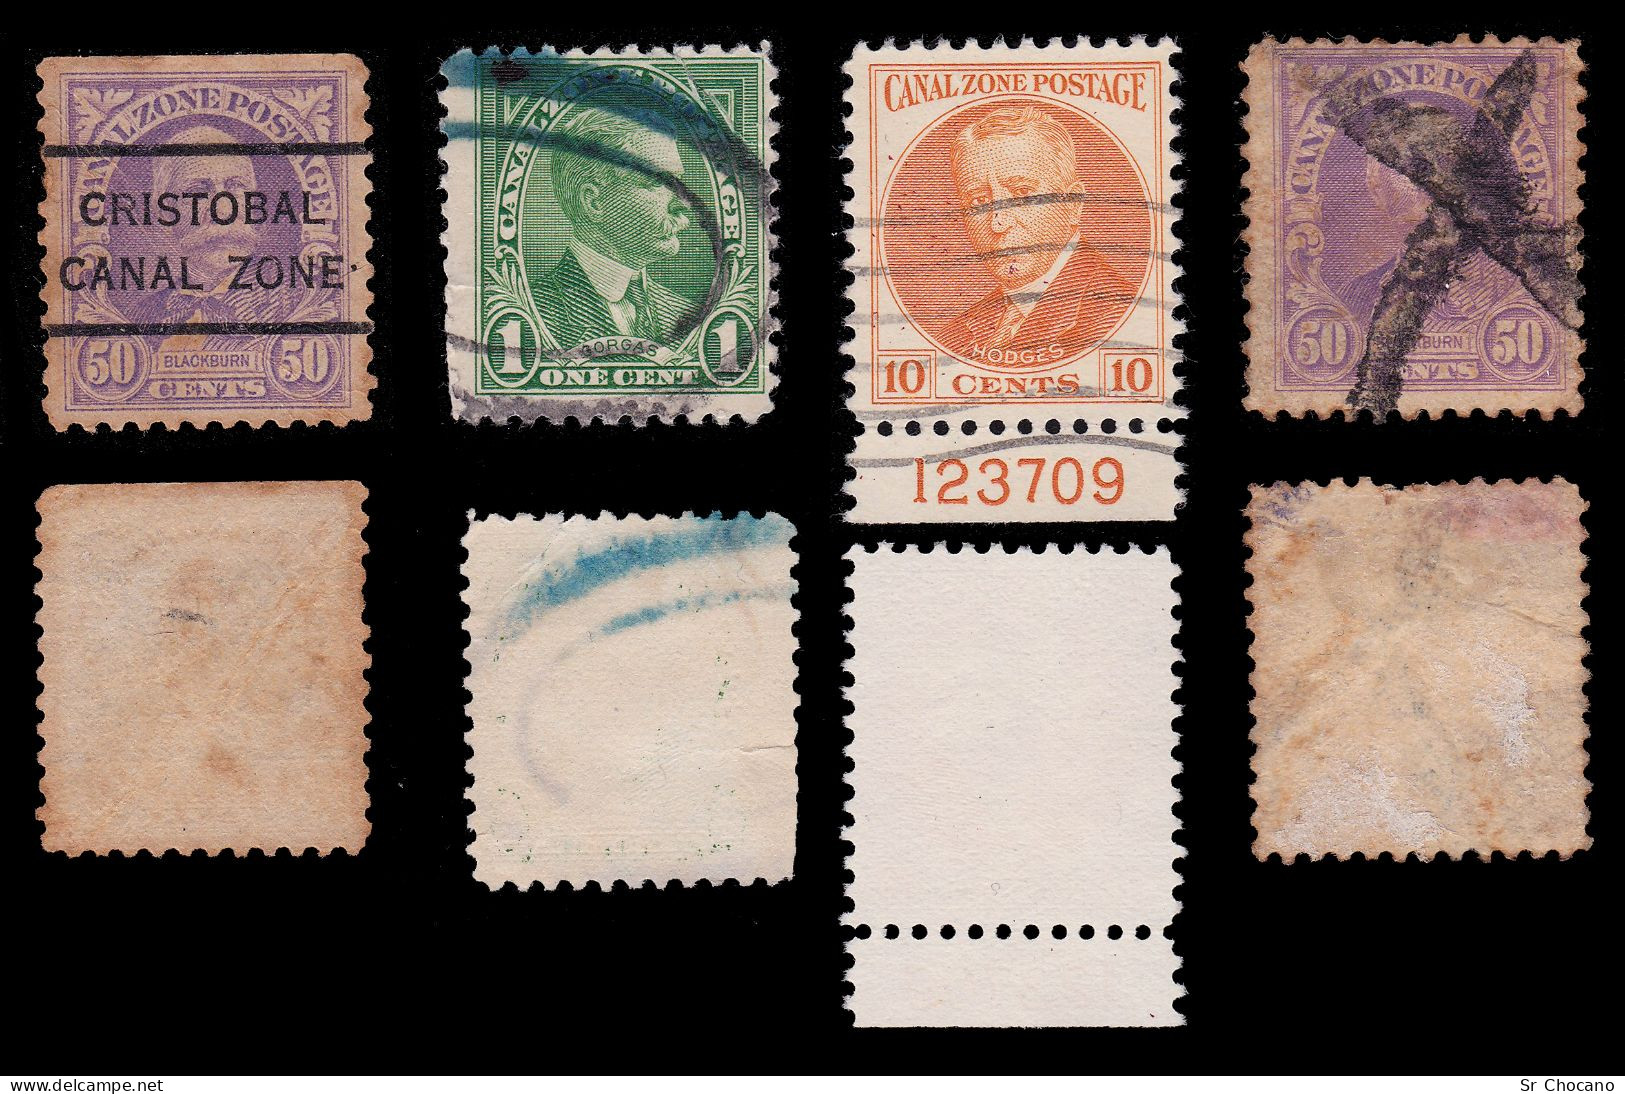 CANAL ZONE STAMPS.SET 13.USED - Kanalzone